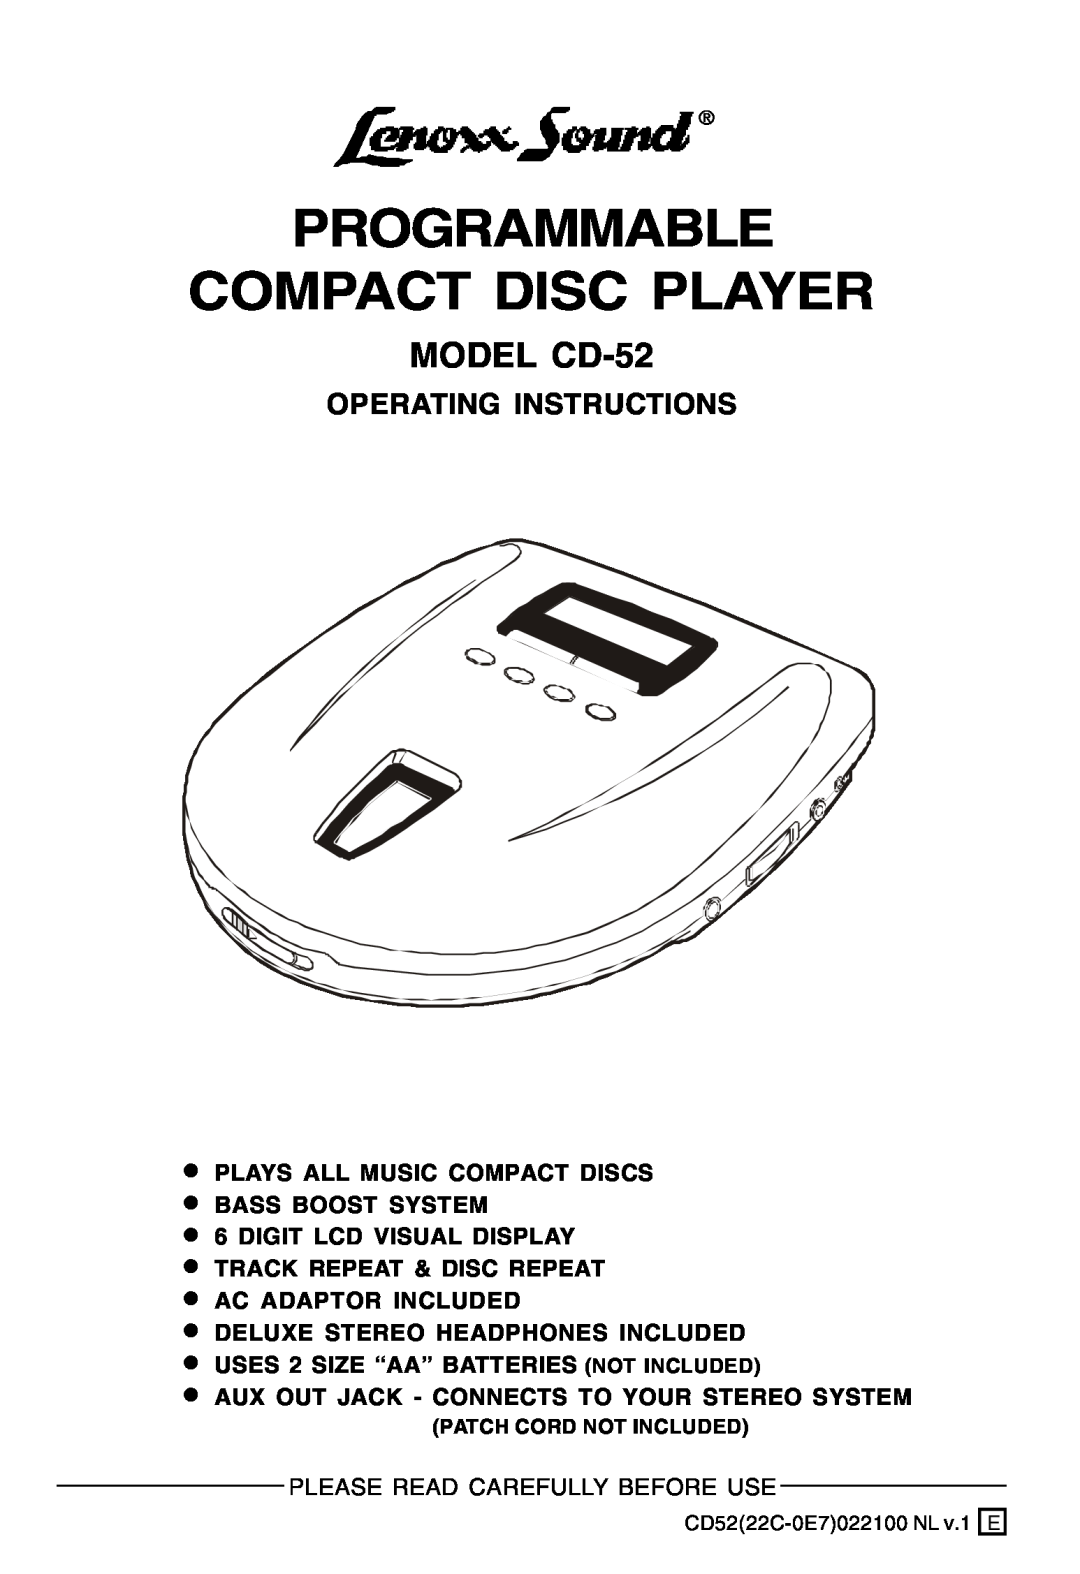 Lenoxx Electronics manual MODEL CD-52, Operating Instructions, Programmable Compact Disc Player 